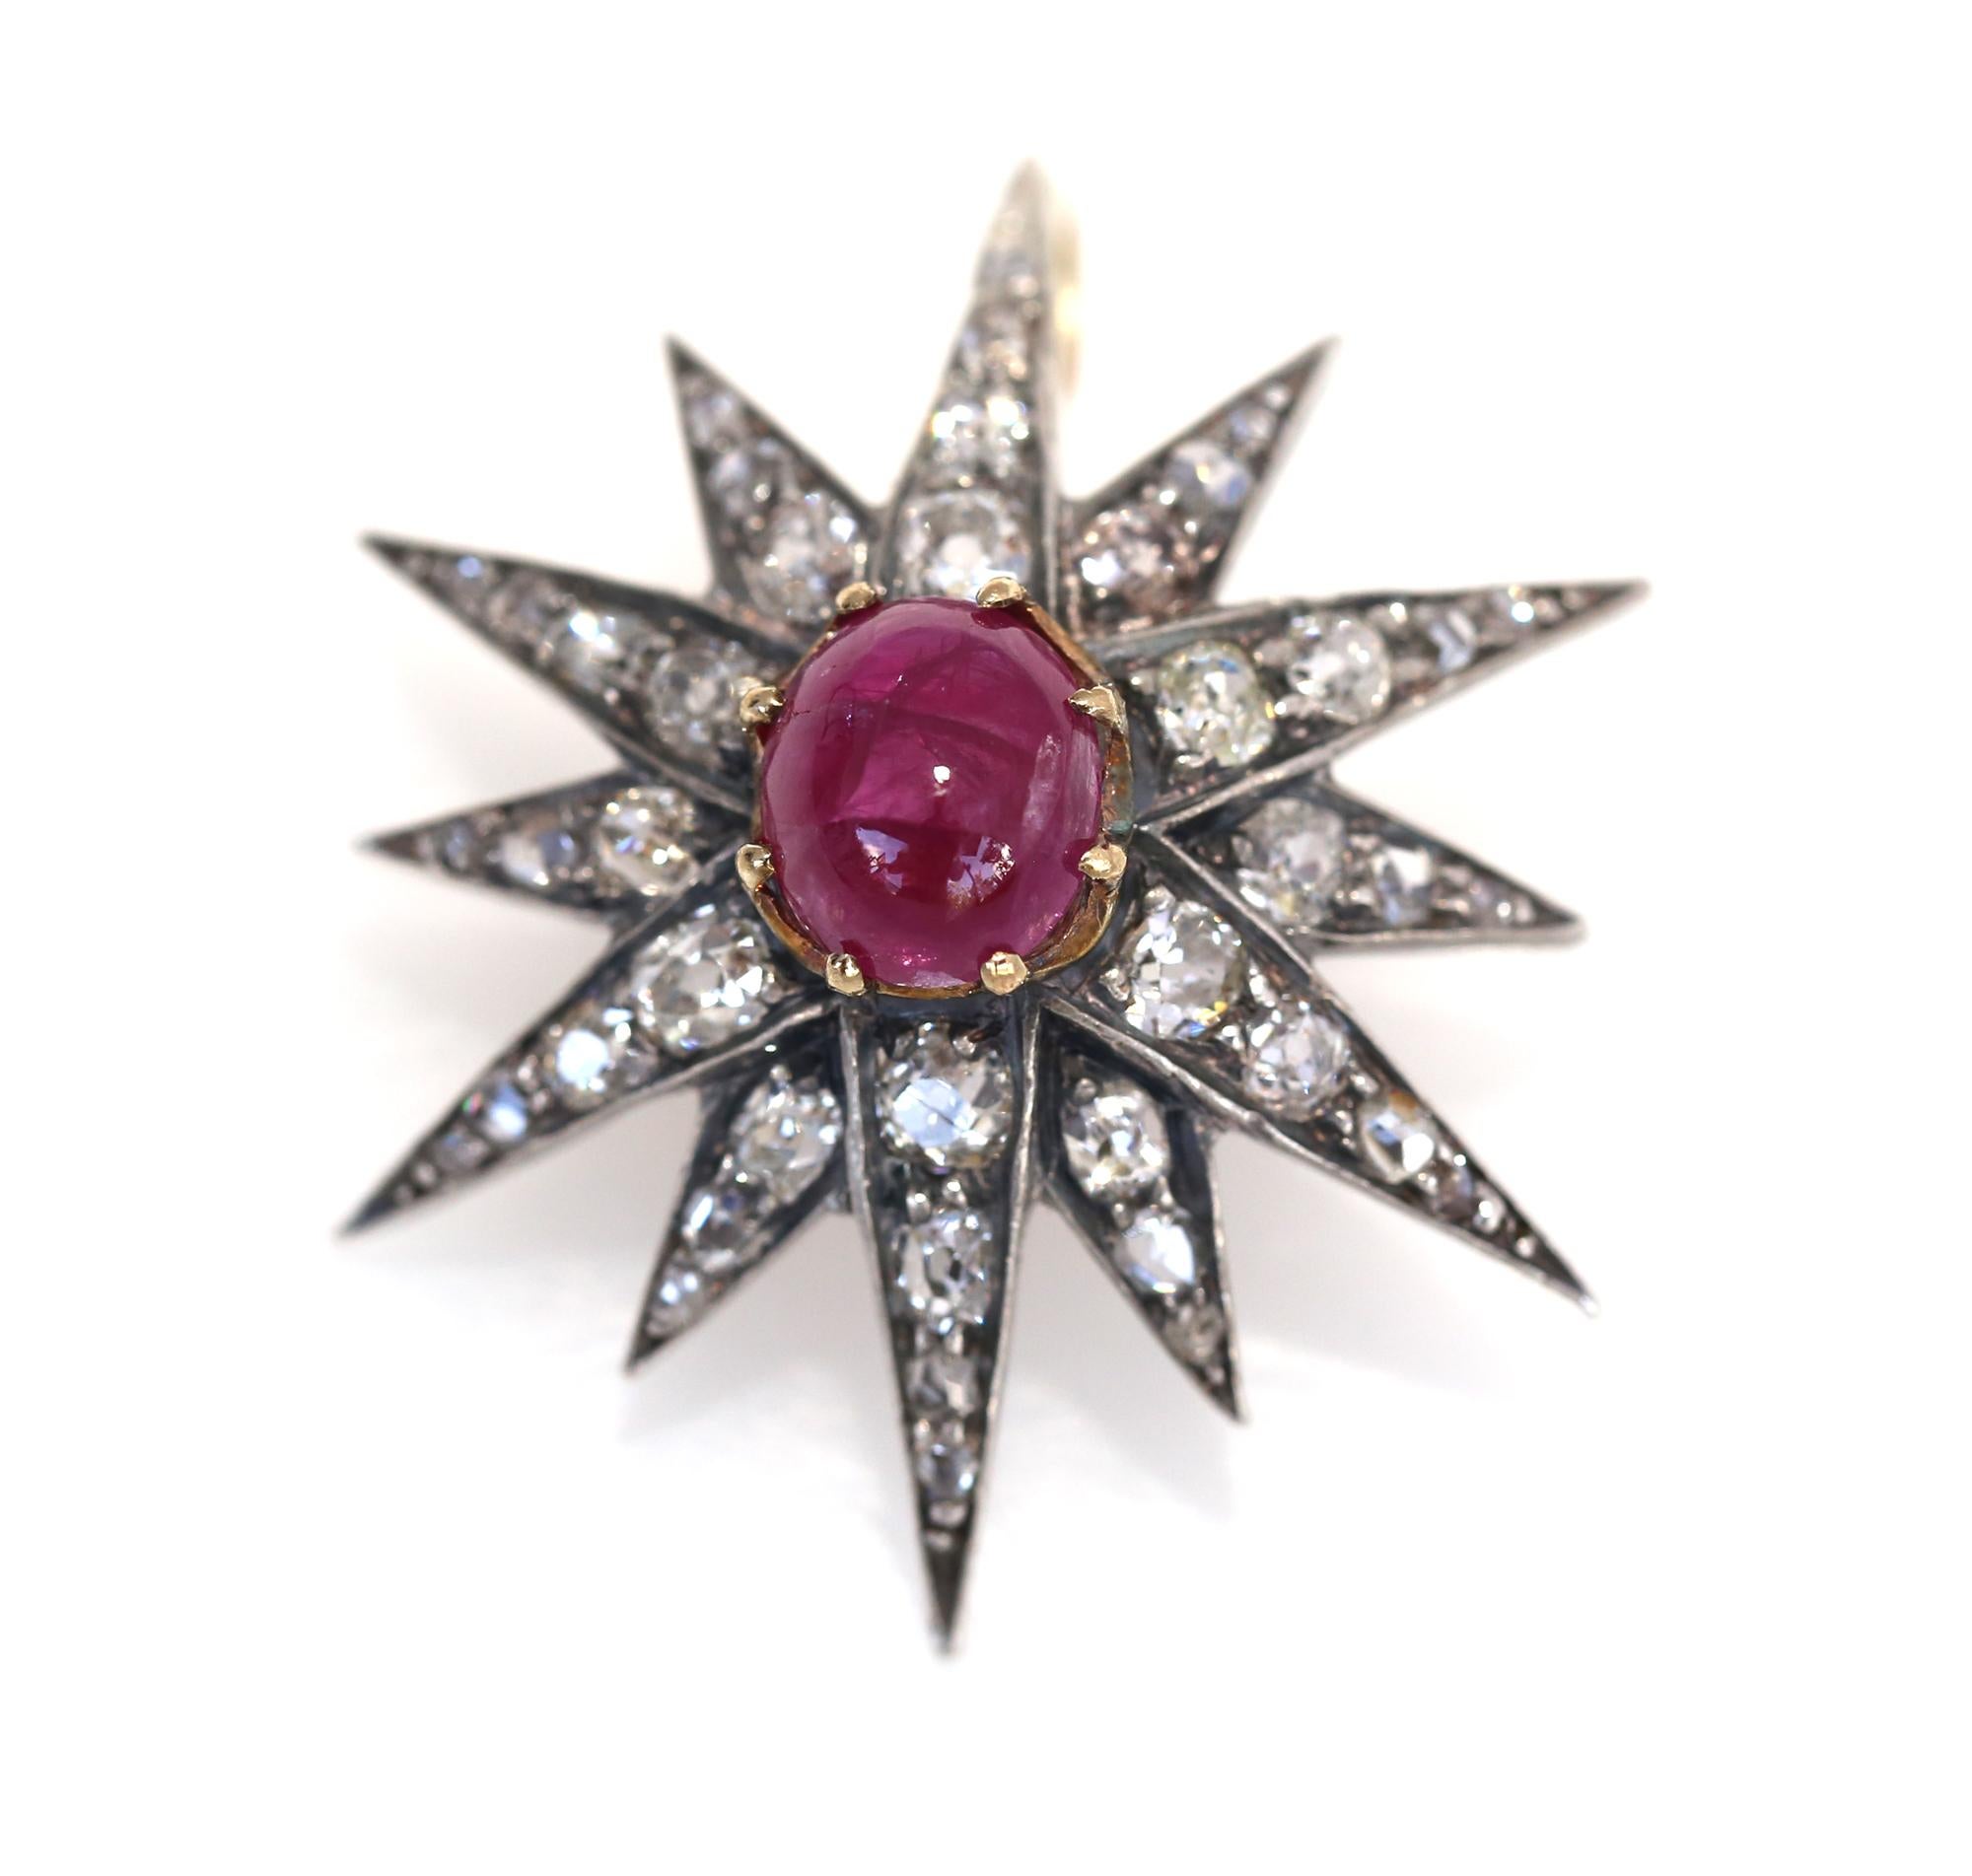 2.5Ct Cabochon Ruby with 1.5Ct  Diamonds brooch turns (transforms) into a pendant. Fine Victorian item.
The brooch has a form of a medal, a multi beam star with a fine Cabochon Ruby in the middle. It is hard to understand now the idea behind this